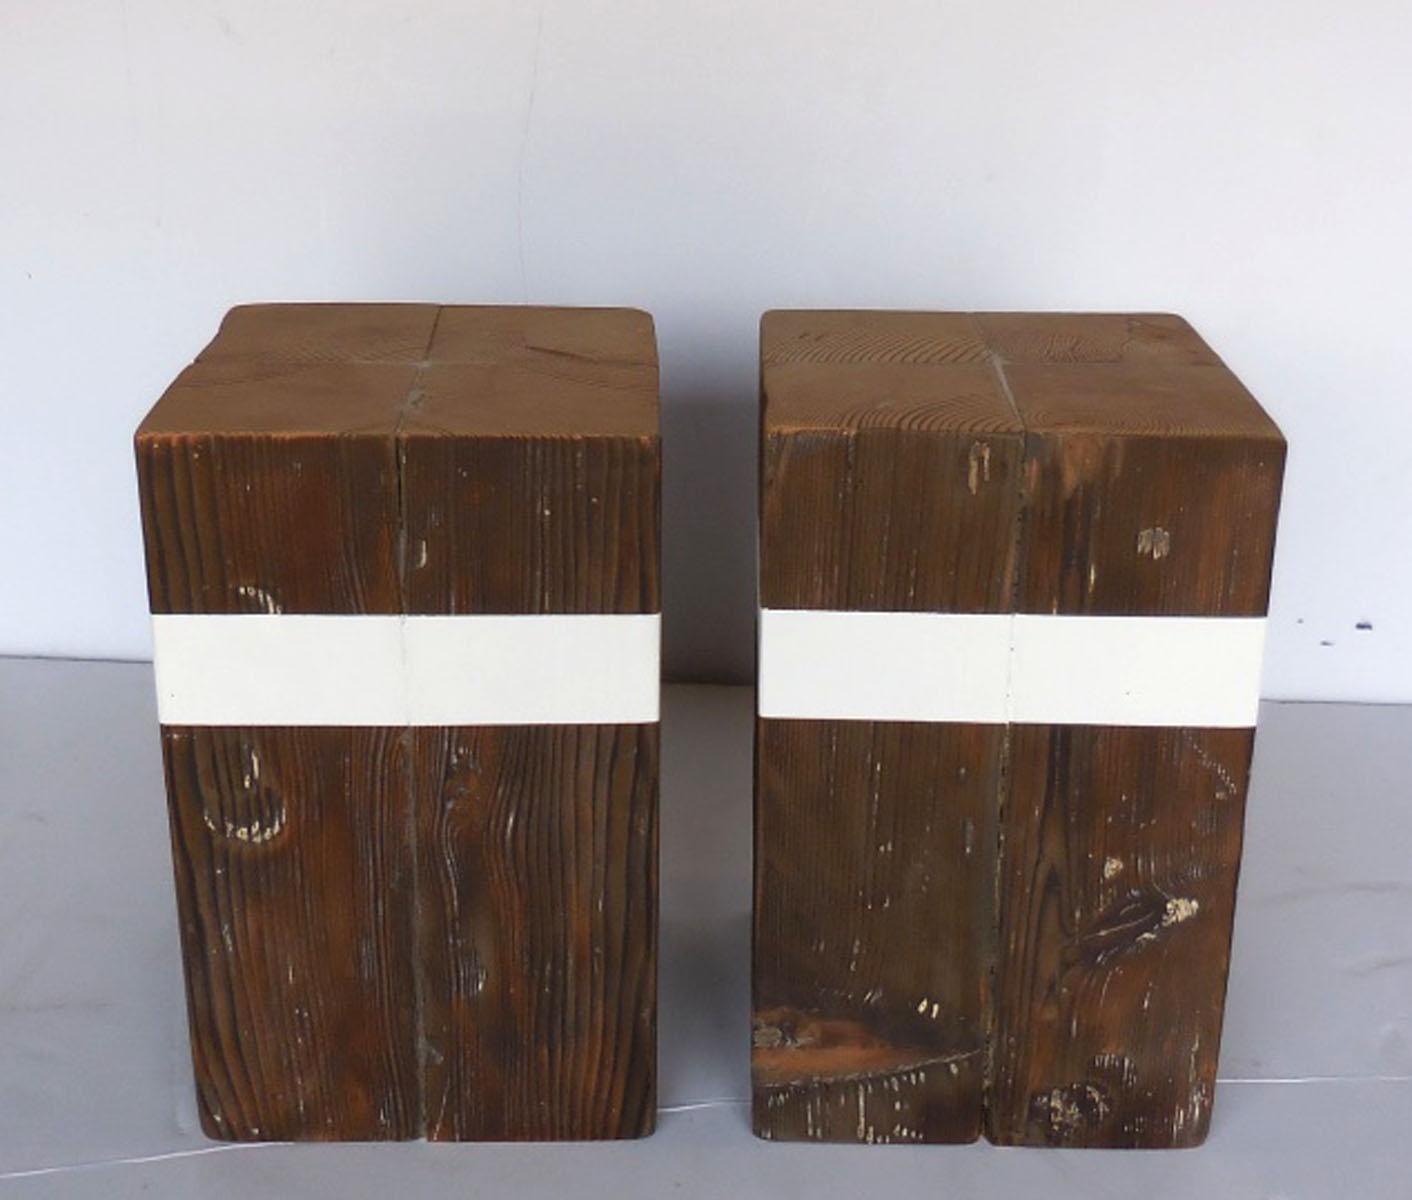 Pair of reclaimed wood rustic modern, organic cube tables with white stripe. Sold as a pair. Old worn patina on wood. Some white paint remnants. New white stripe.